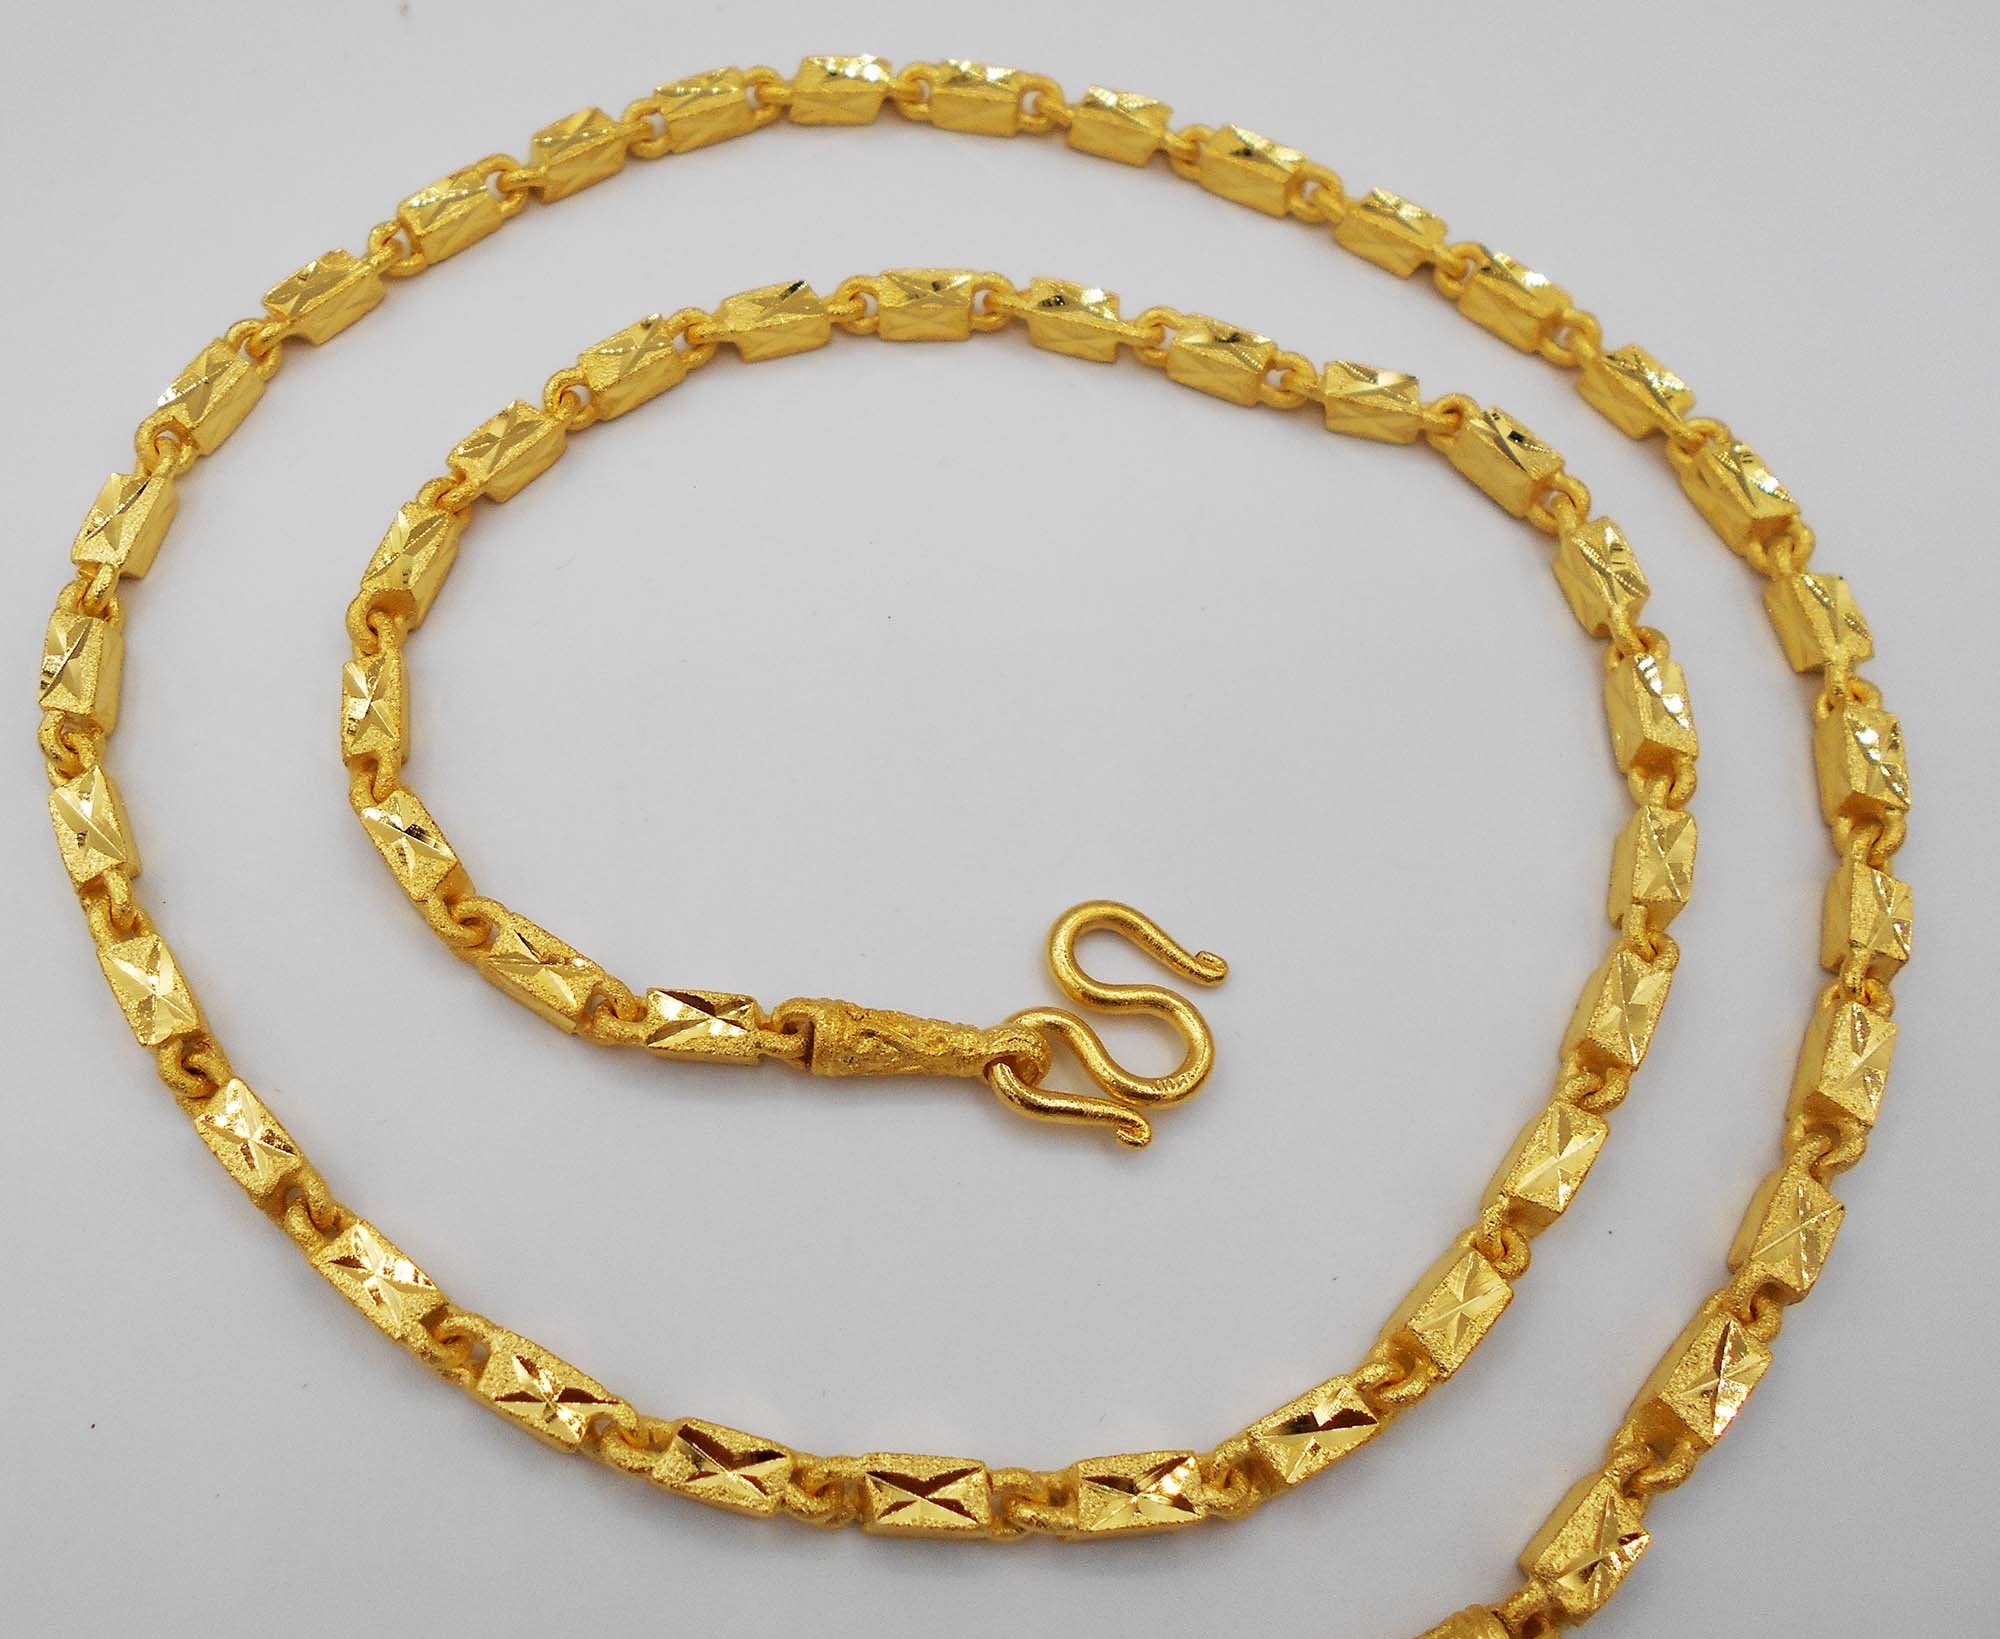 4 MM Necklace Gold Bar Chain Link 22K 23K 24K Thai Baht Yellow - Etsy